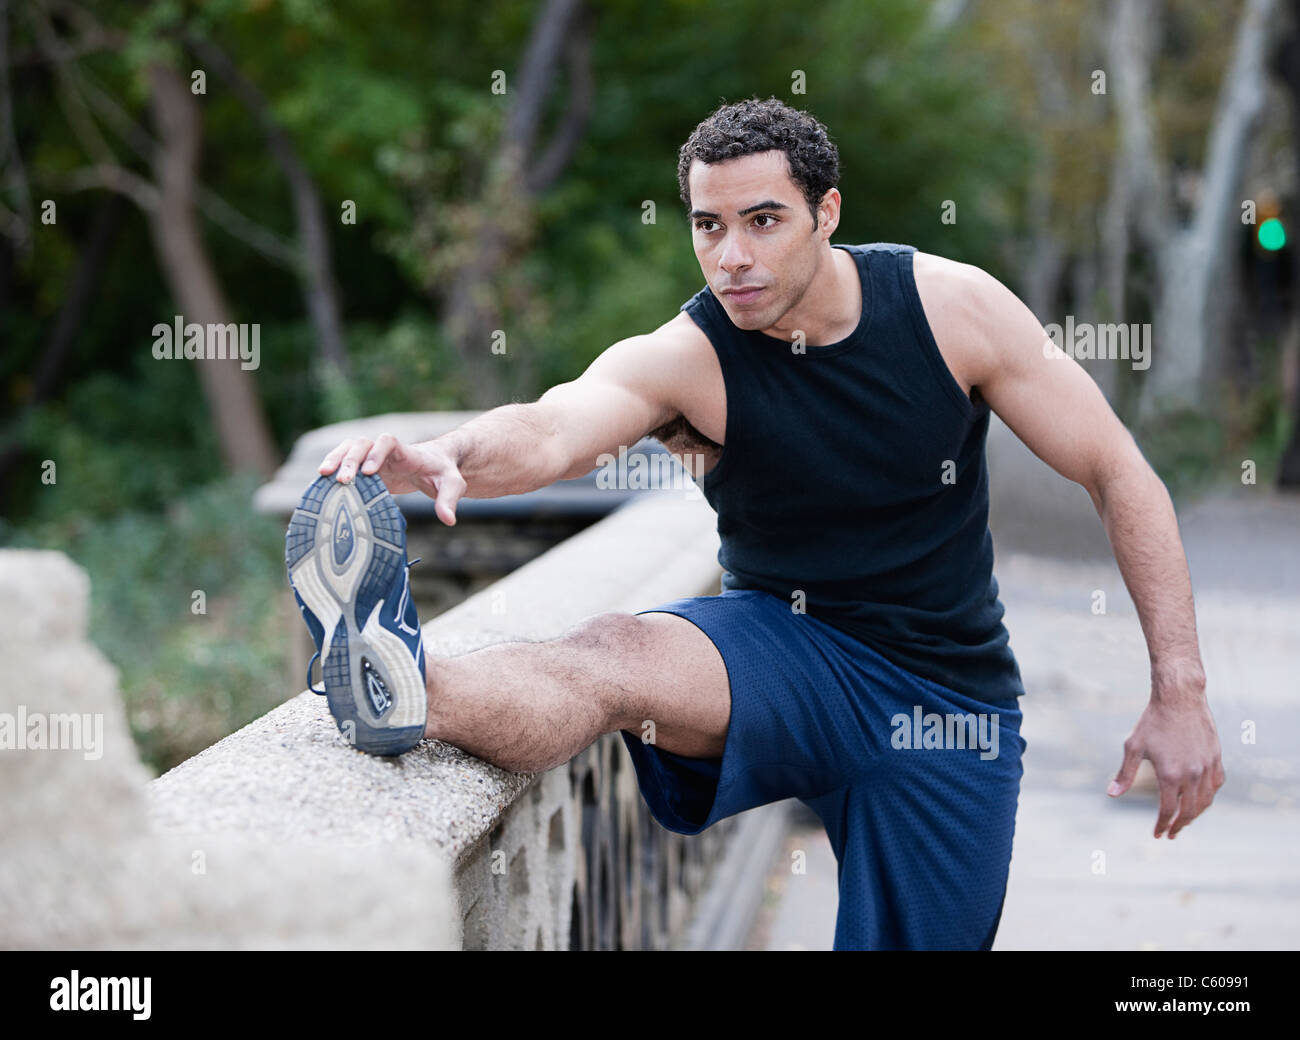 USA, New York, New York City, Young man stretching legs in park Stock Photo